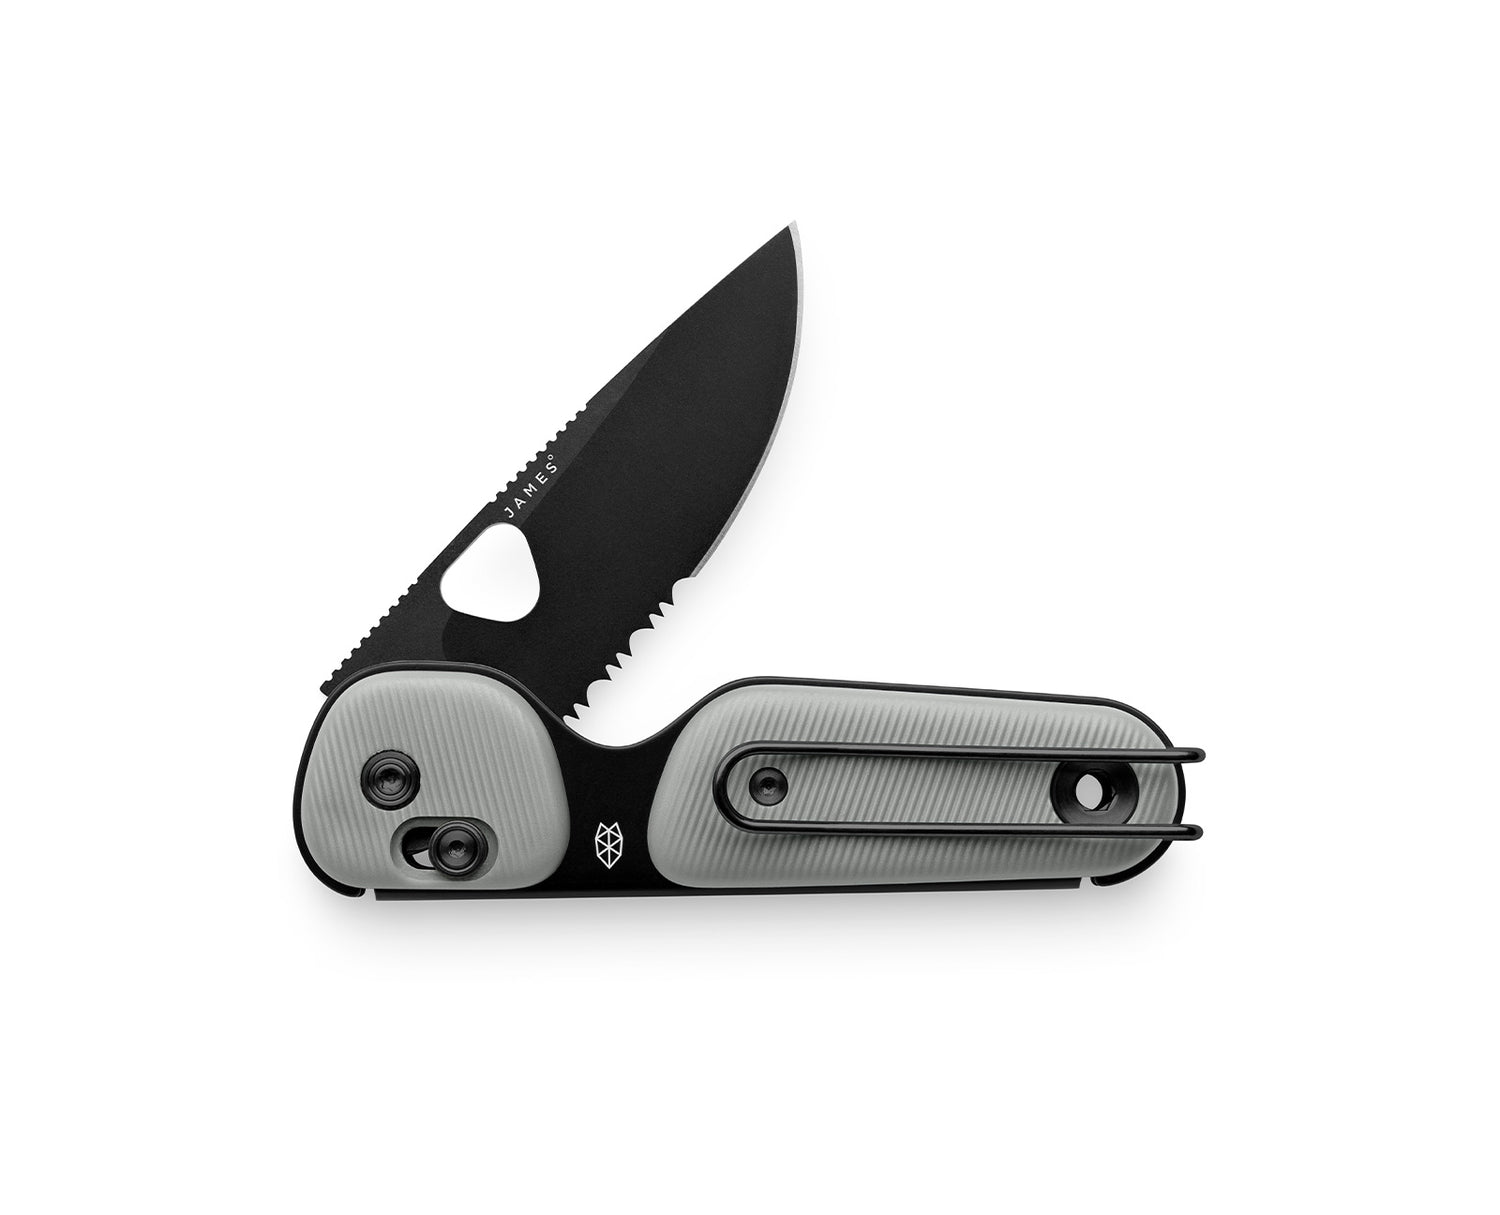 Superb Small Pocket Knives (Buy two & get a third free)